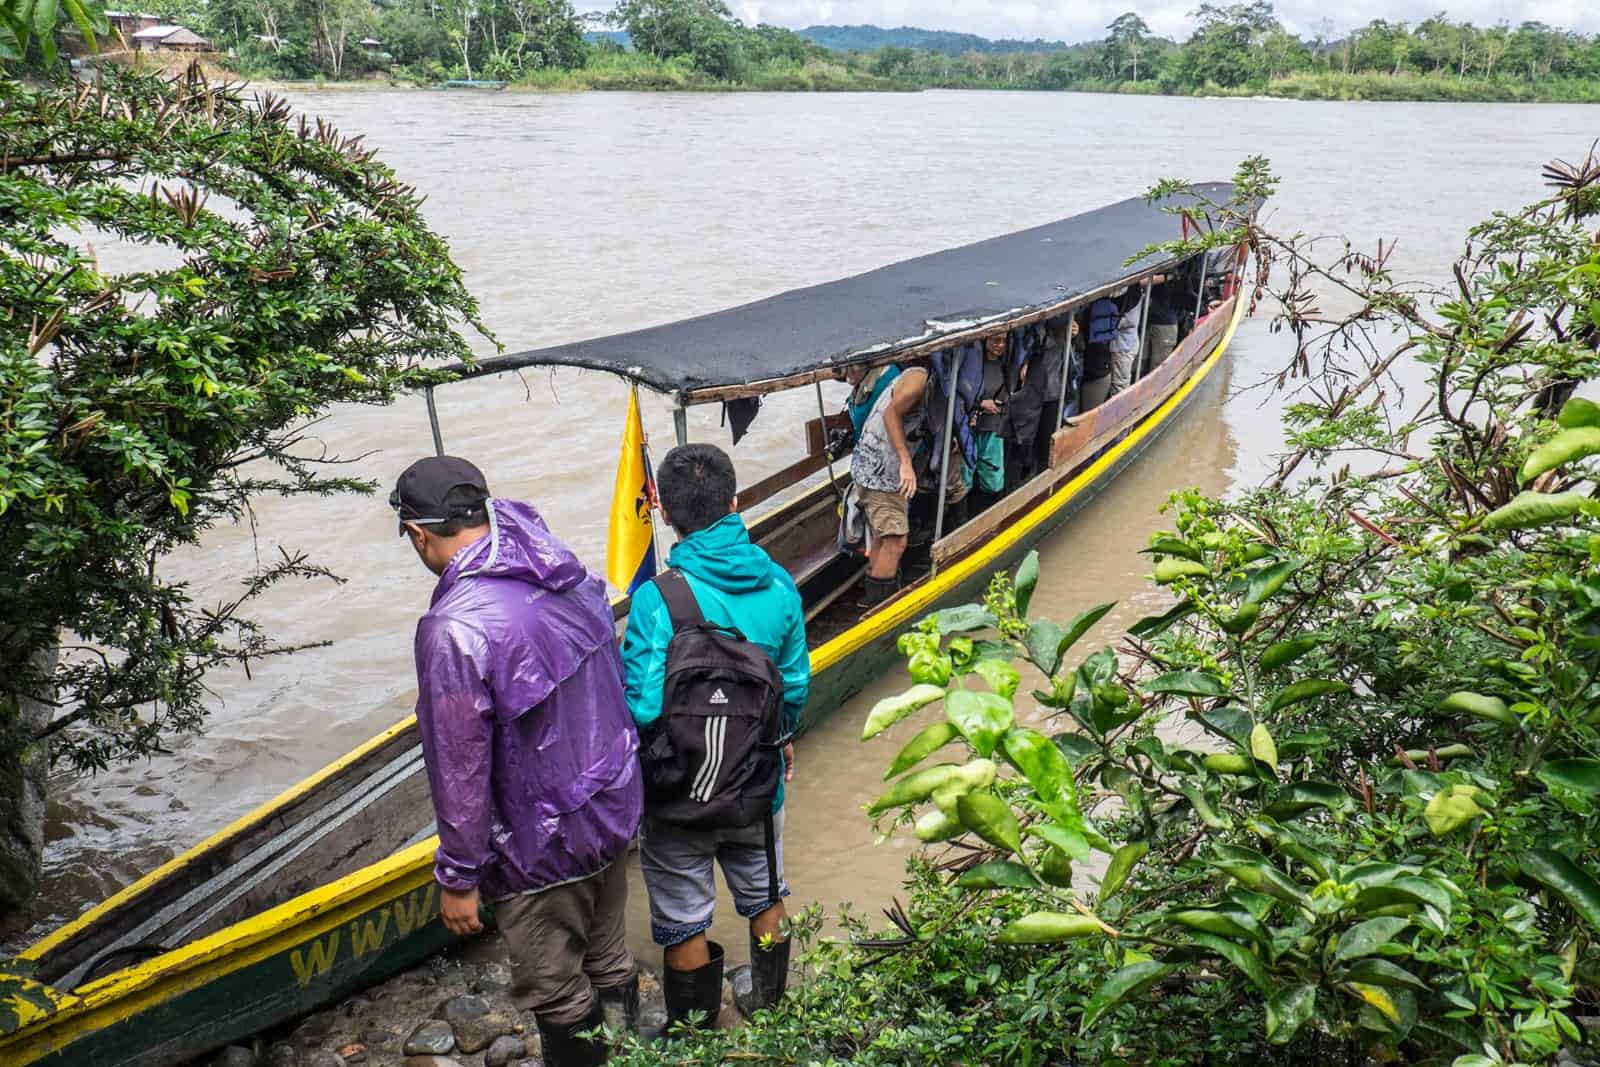 Passengers board a long, narrow yellow painted boat on the jungle shores of the Ecuador Amazon. The boat reaches out into the wide, muddy water. 